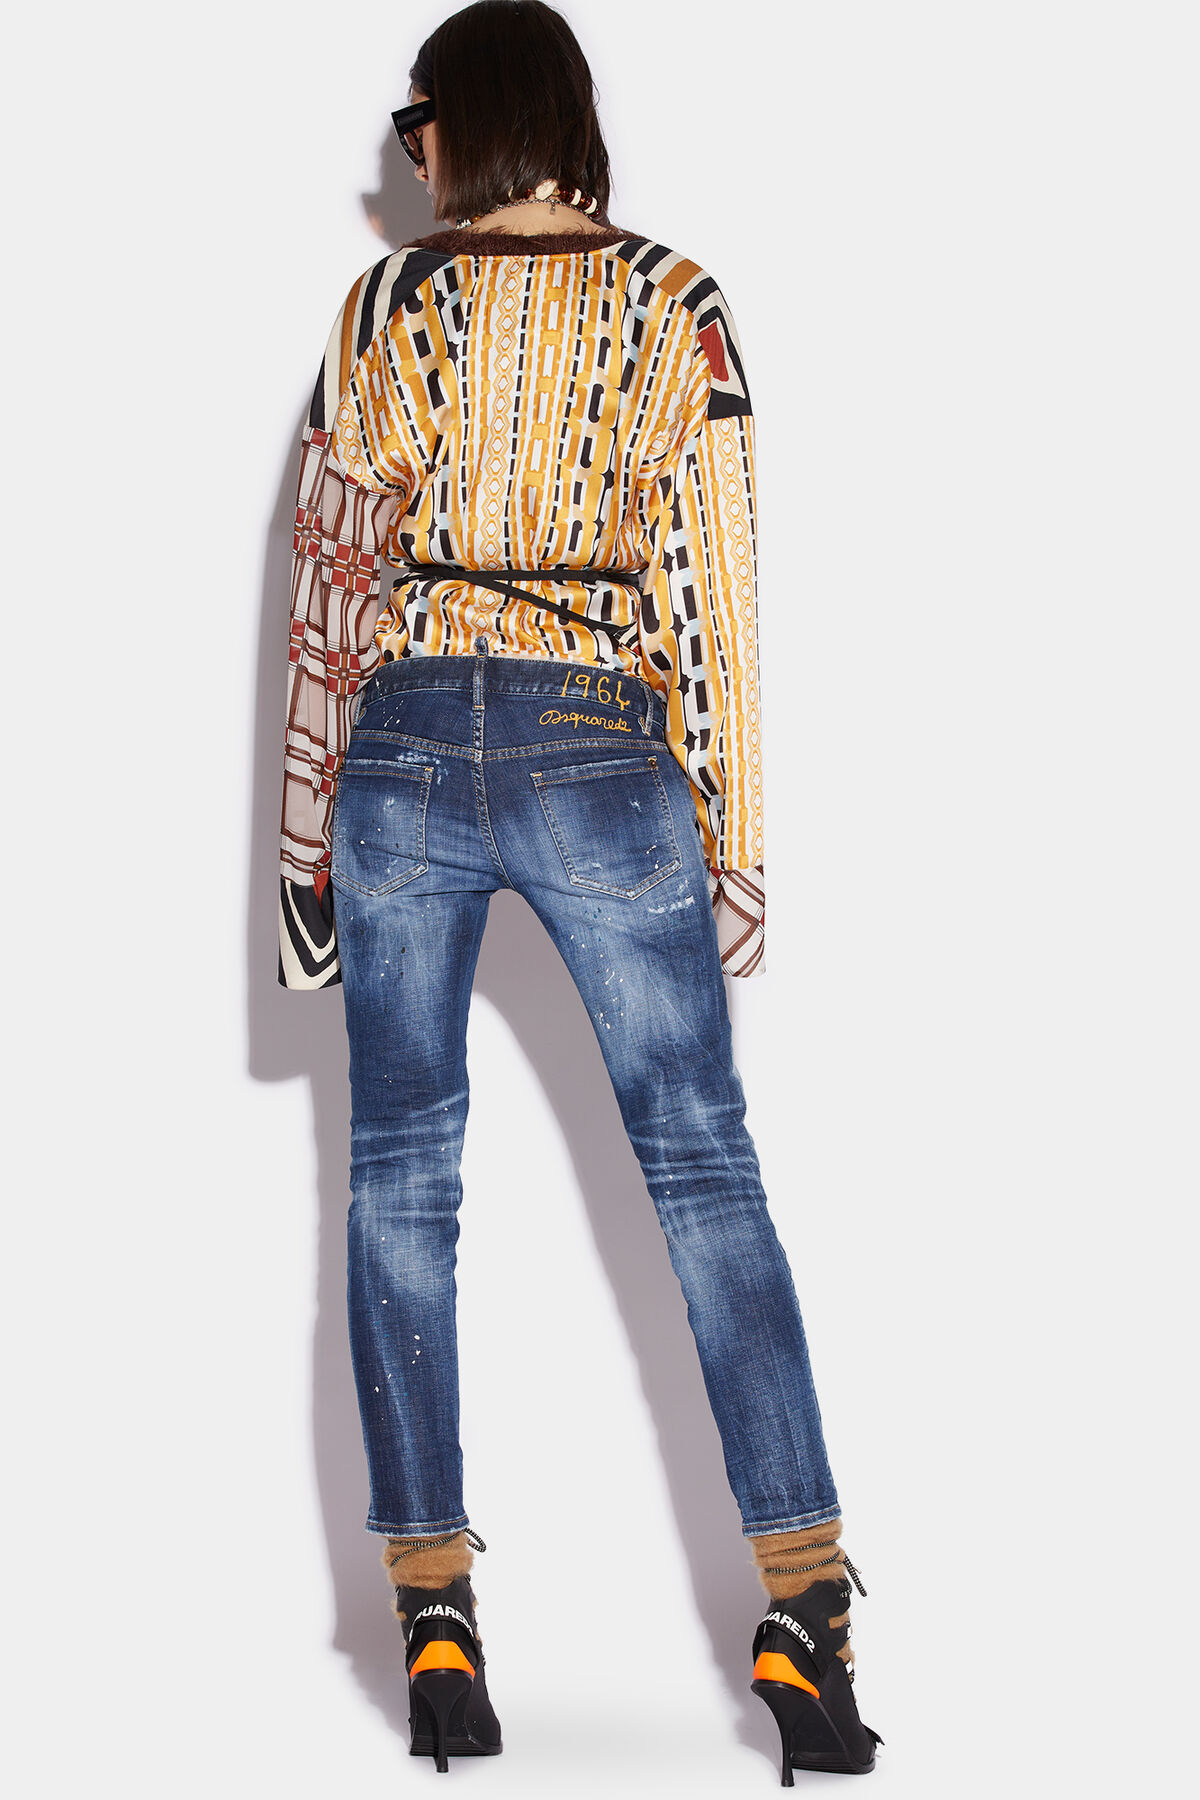 DSQUARED2 Jennifer Cropped Jeans in Washed Blue